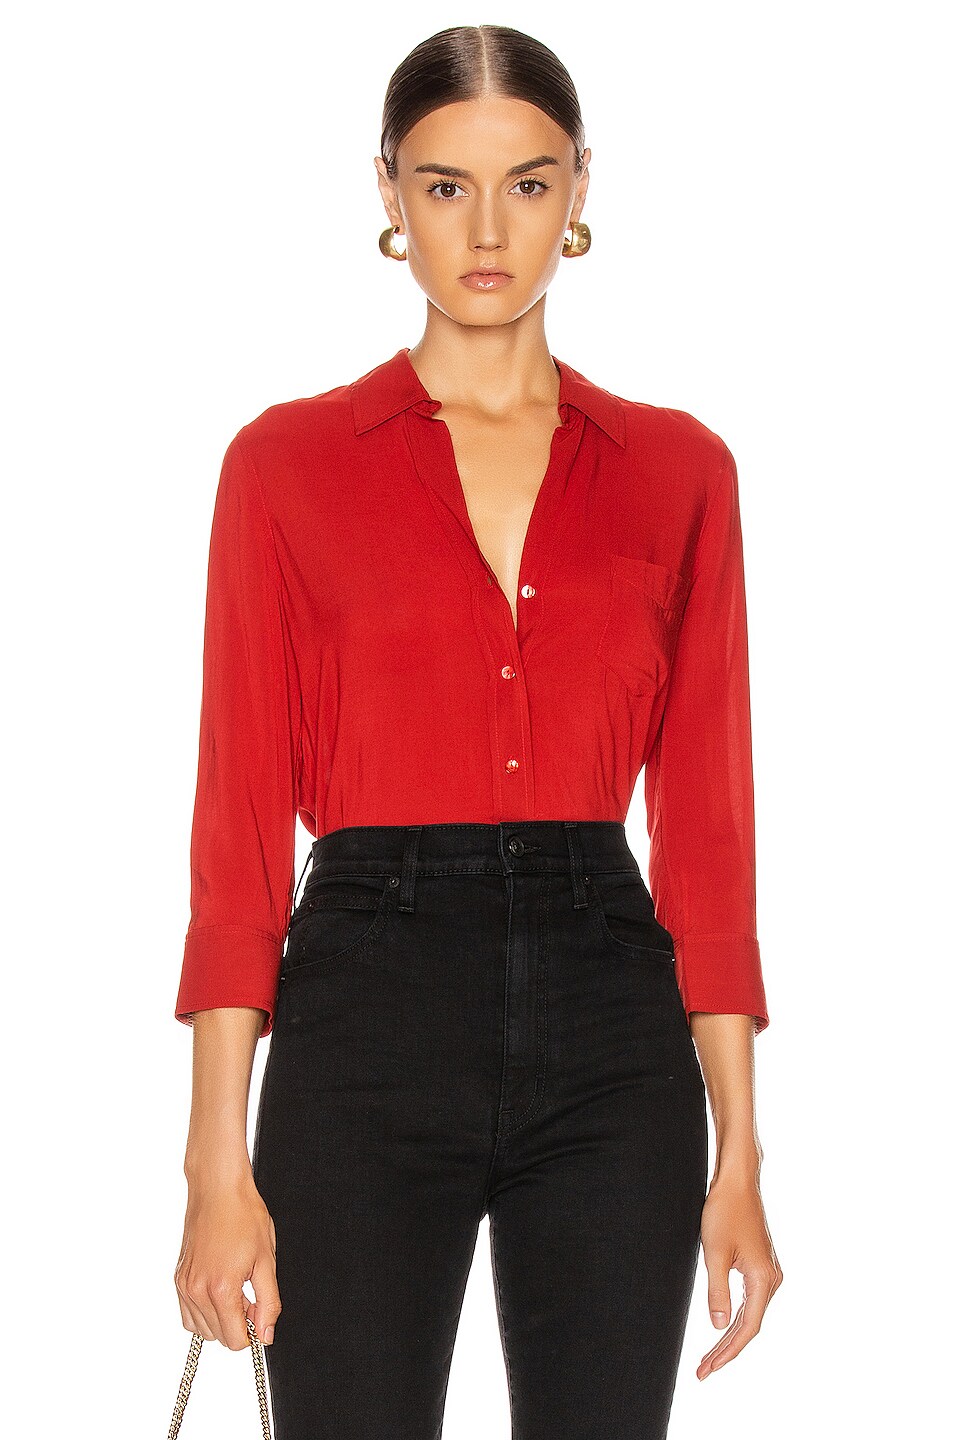 Image 1 of L'AGENCE Ryan 3/4 Sleeve Blouse in Redstone